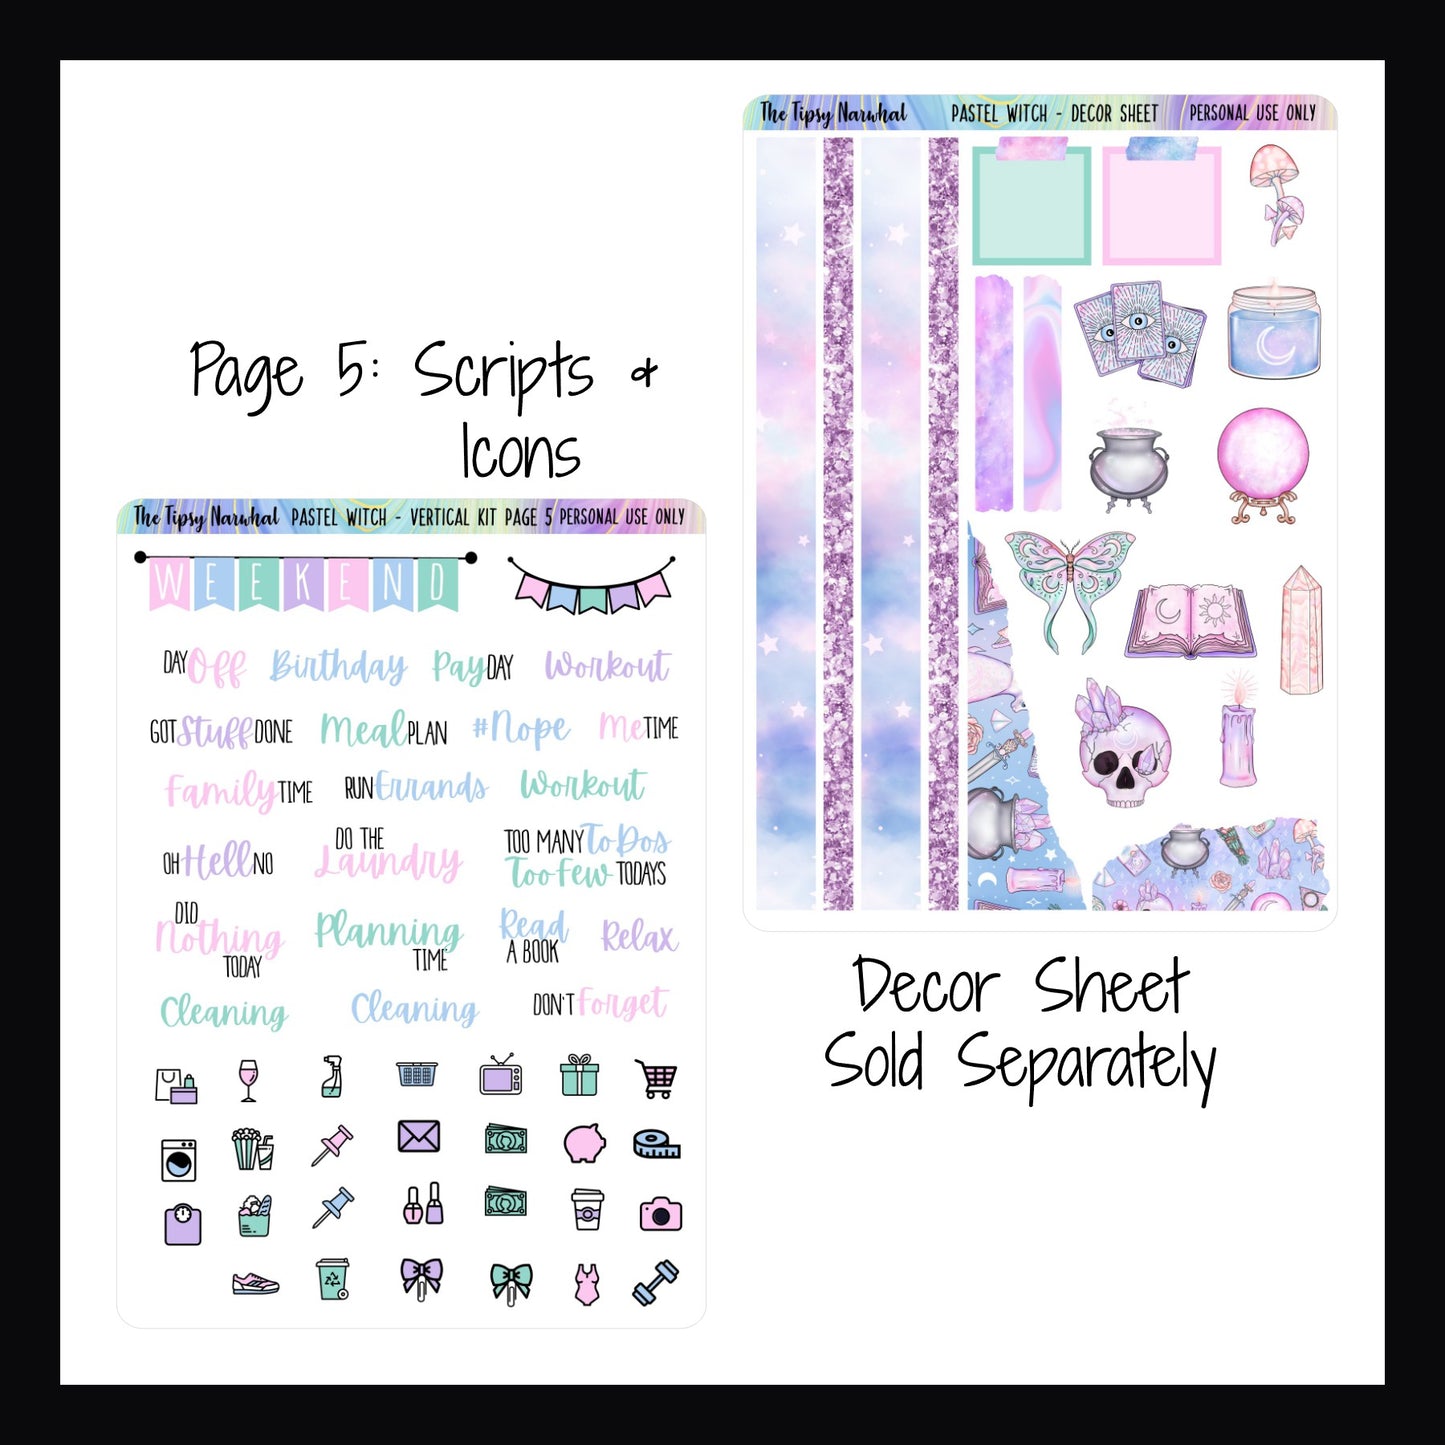 Digital Pastel Witch Vertical Kit page 5 features a weekend banner, script stickers and daily icon stickers.  A matching decor sheet is sold separately.